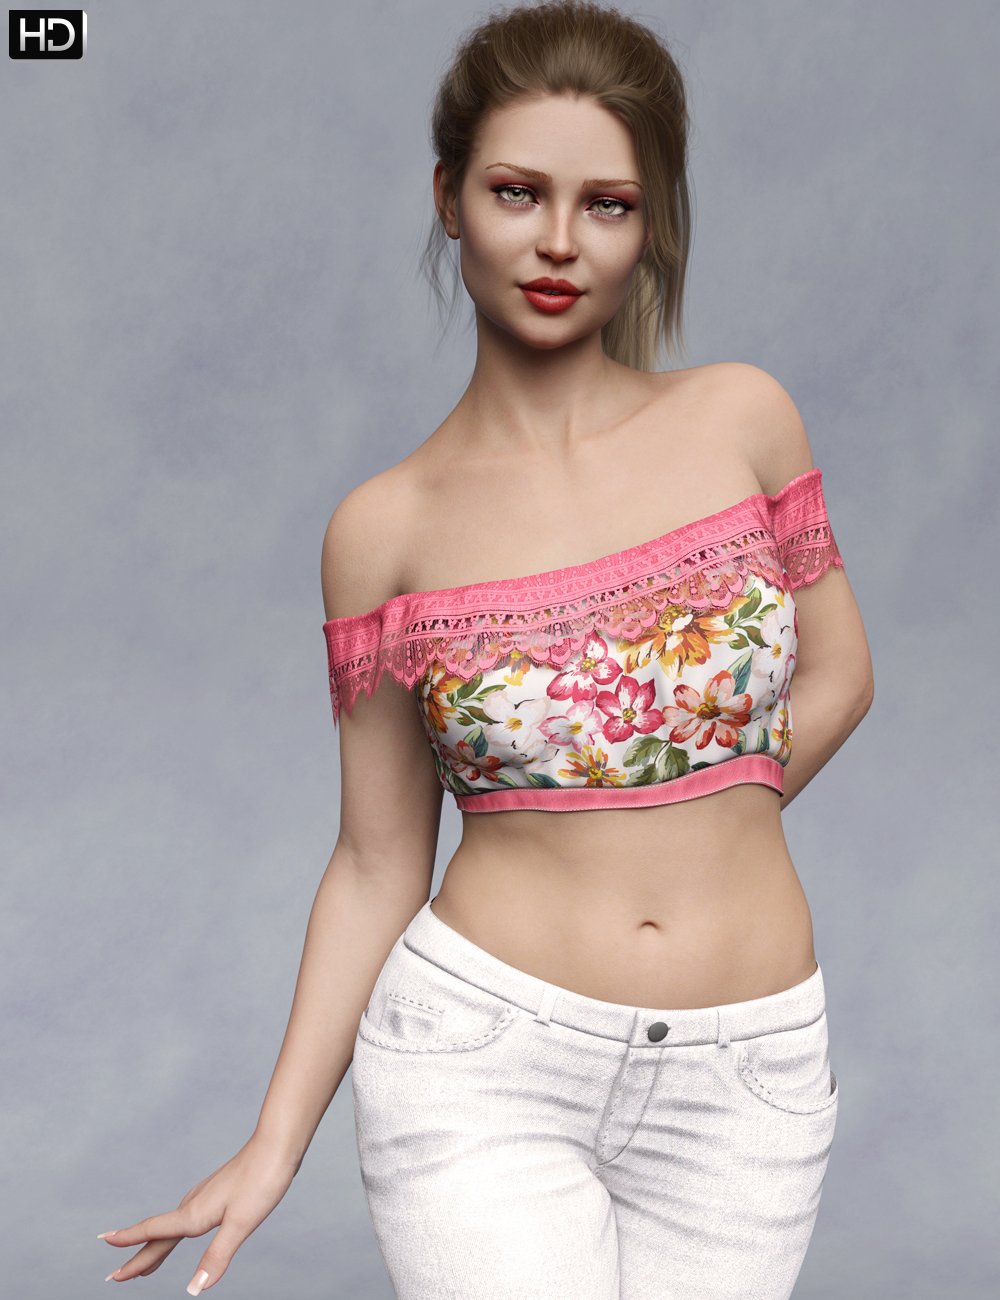 Carina HD for Robyn 8 by: Emrys, 3D Models by Daz 3D